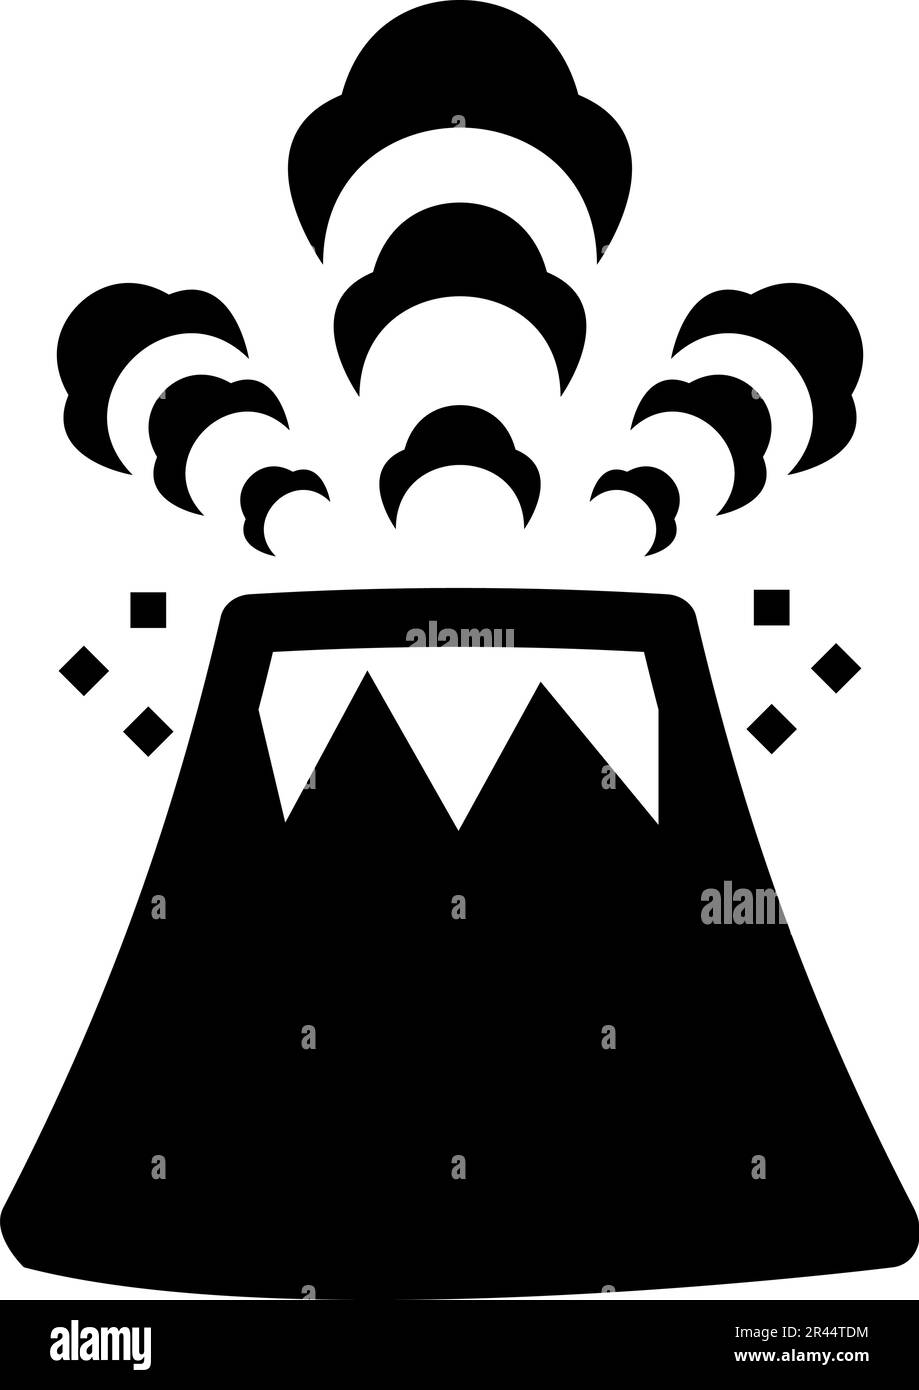 Volcano spewing lava and rocks icon black color vector illustration image flat style simple Stock Vector